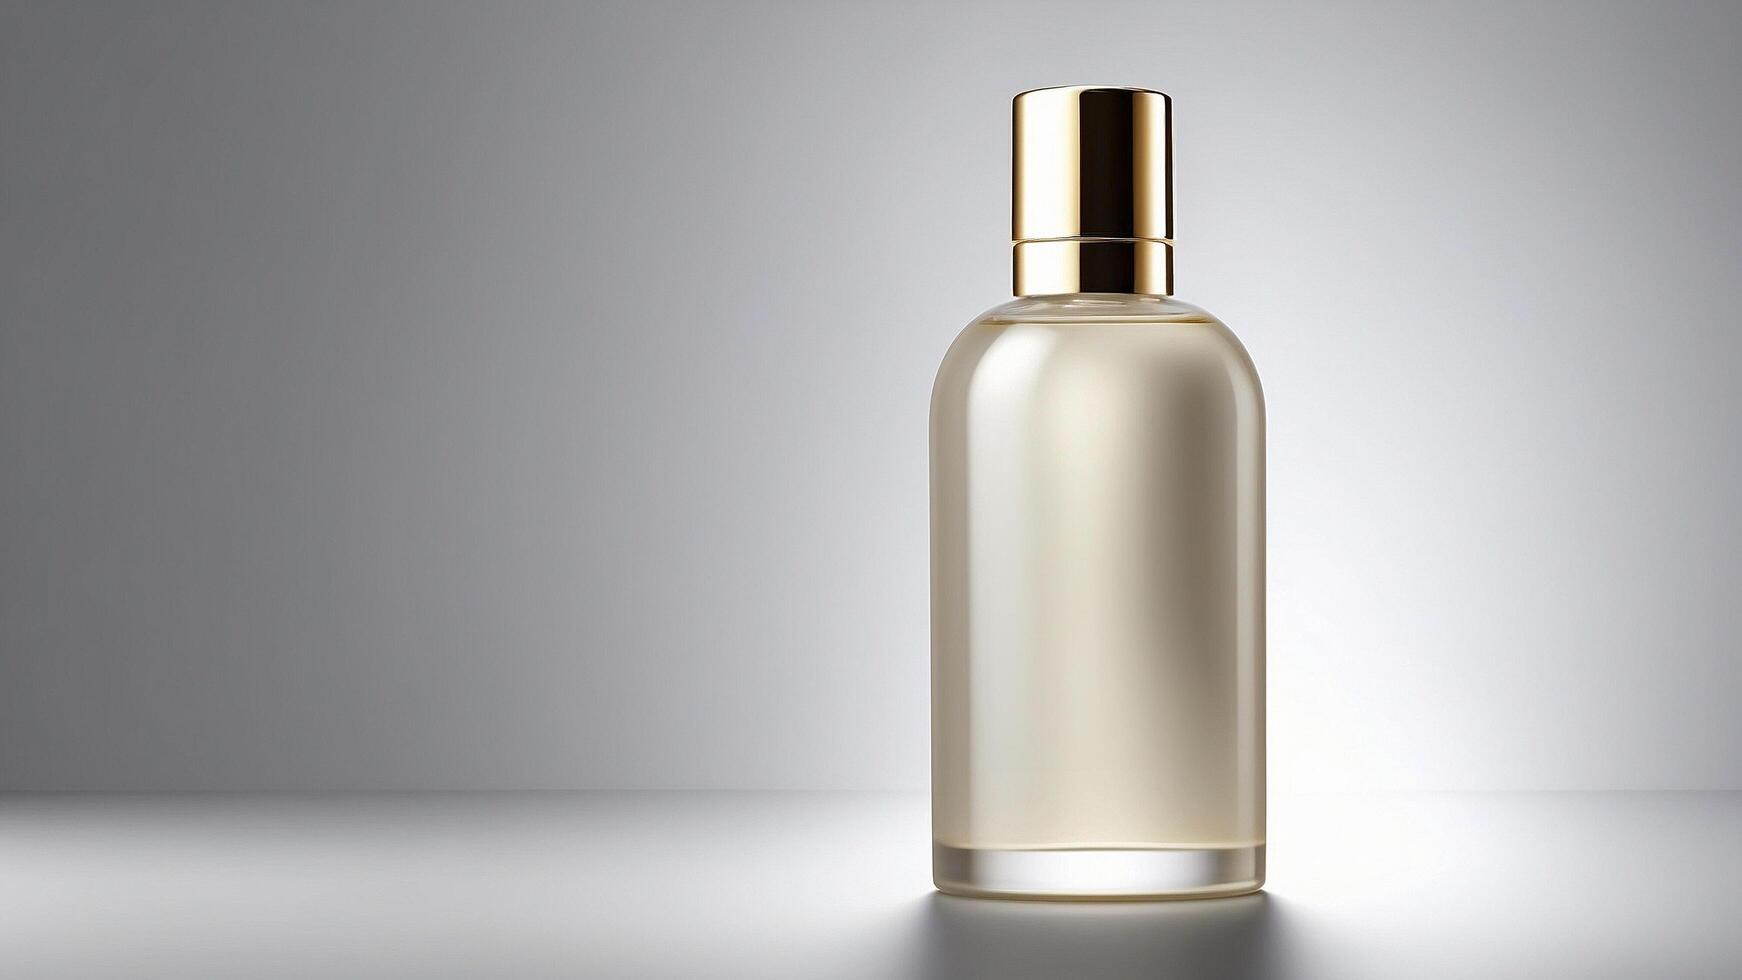 Elegant Frosted Glass Skincare Toner Bottle with Golden Cap on a Minimalistic Backdrop photo